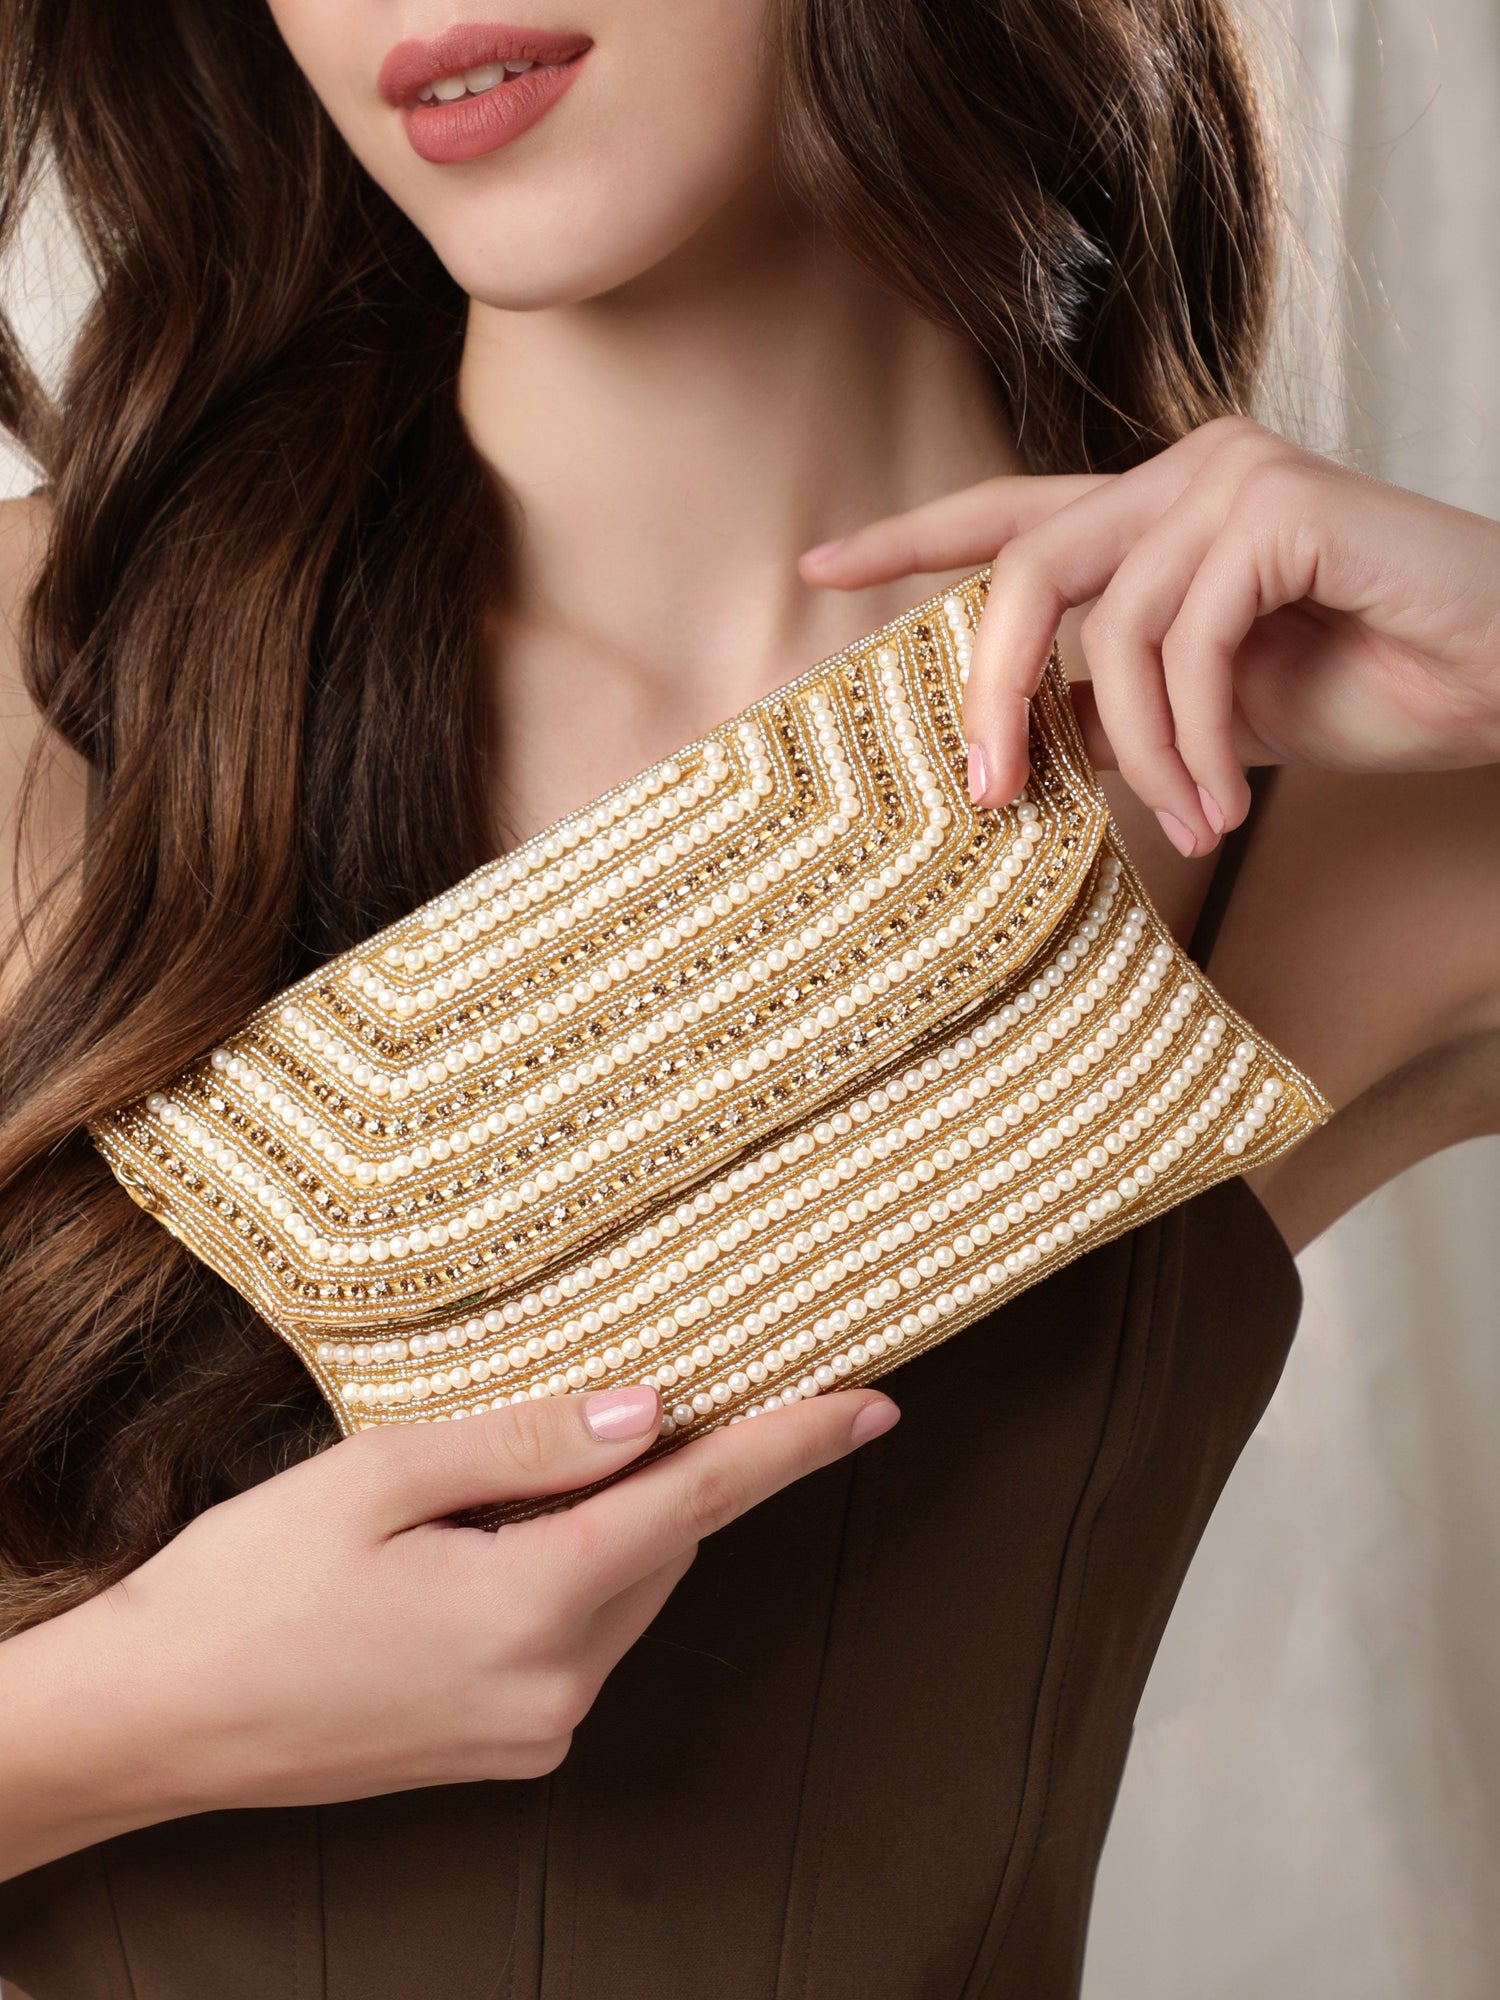 Rubans Clutch Embellished with Pearls and Stones Handbag, Wallet Accessories &amp; Clutches